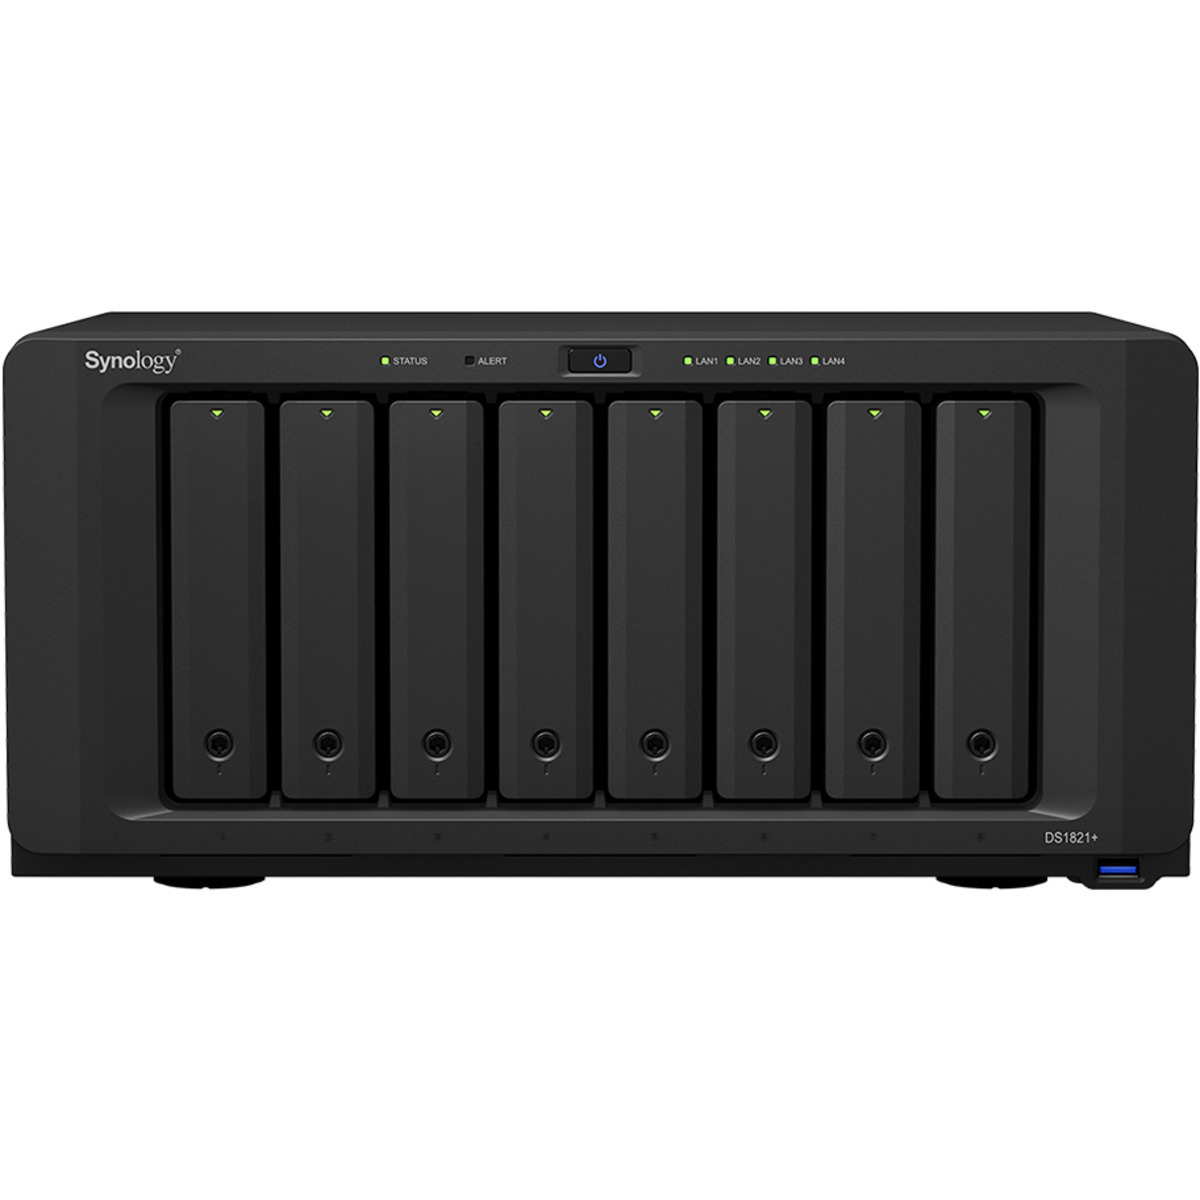 Synology DiskStation DS1821+ 16tb 8-Bay Desktop Multimedia / Power User / Business NAS - Network Attached Storage Device 8x2tb Sandisk Ultra 3D SDSSDH3-2T00 2.5 560/520MB/s SATA 6Gb/s SSD CONSUMER Class Drives Installed - Burn-In Tested - FREE RAM UPGRADE DiskStation DS1821+